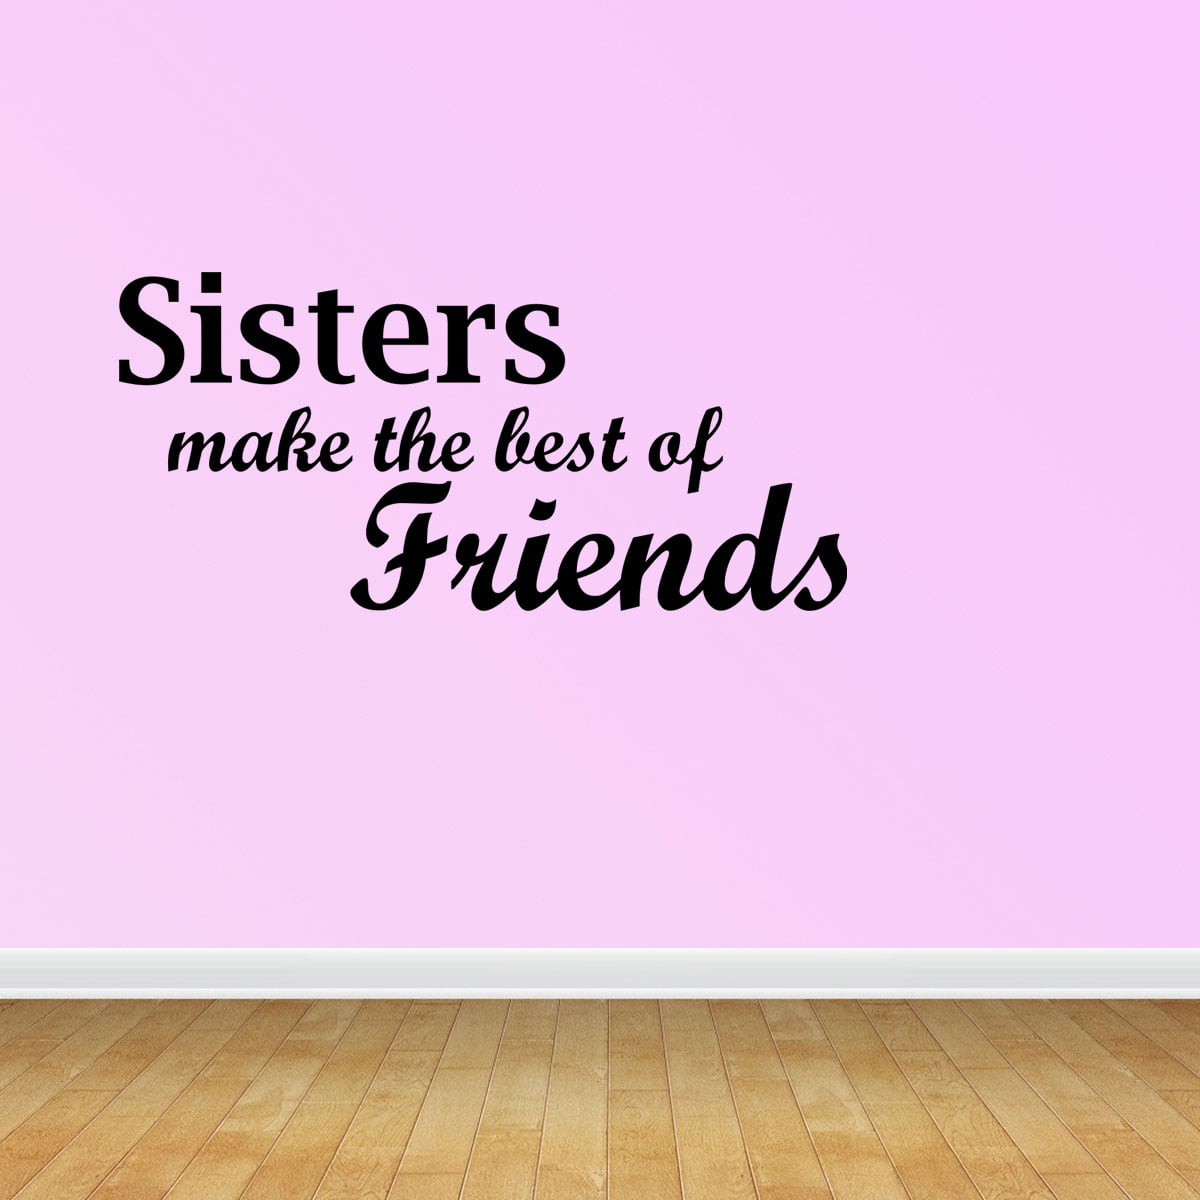 SISTERS MAKE THE BEST OF FRIENDS WALL STICKER QUOTE KIDS WALL ART DECAL X221